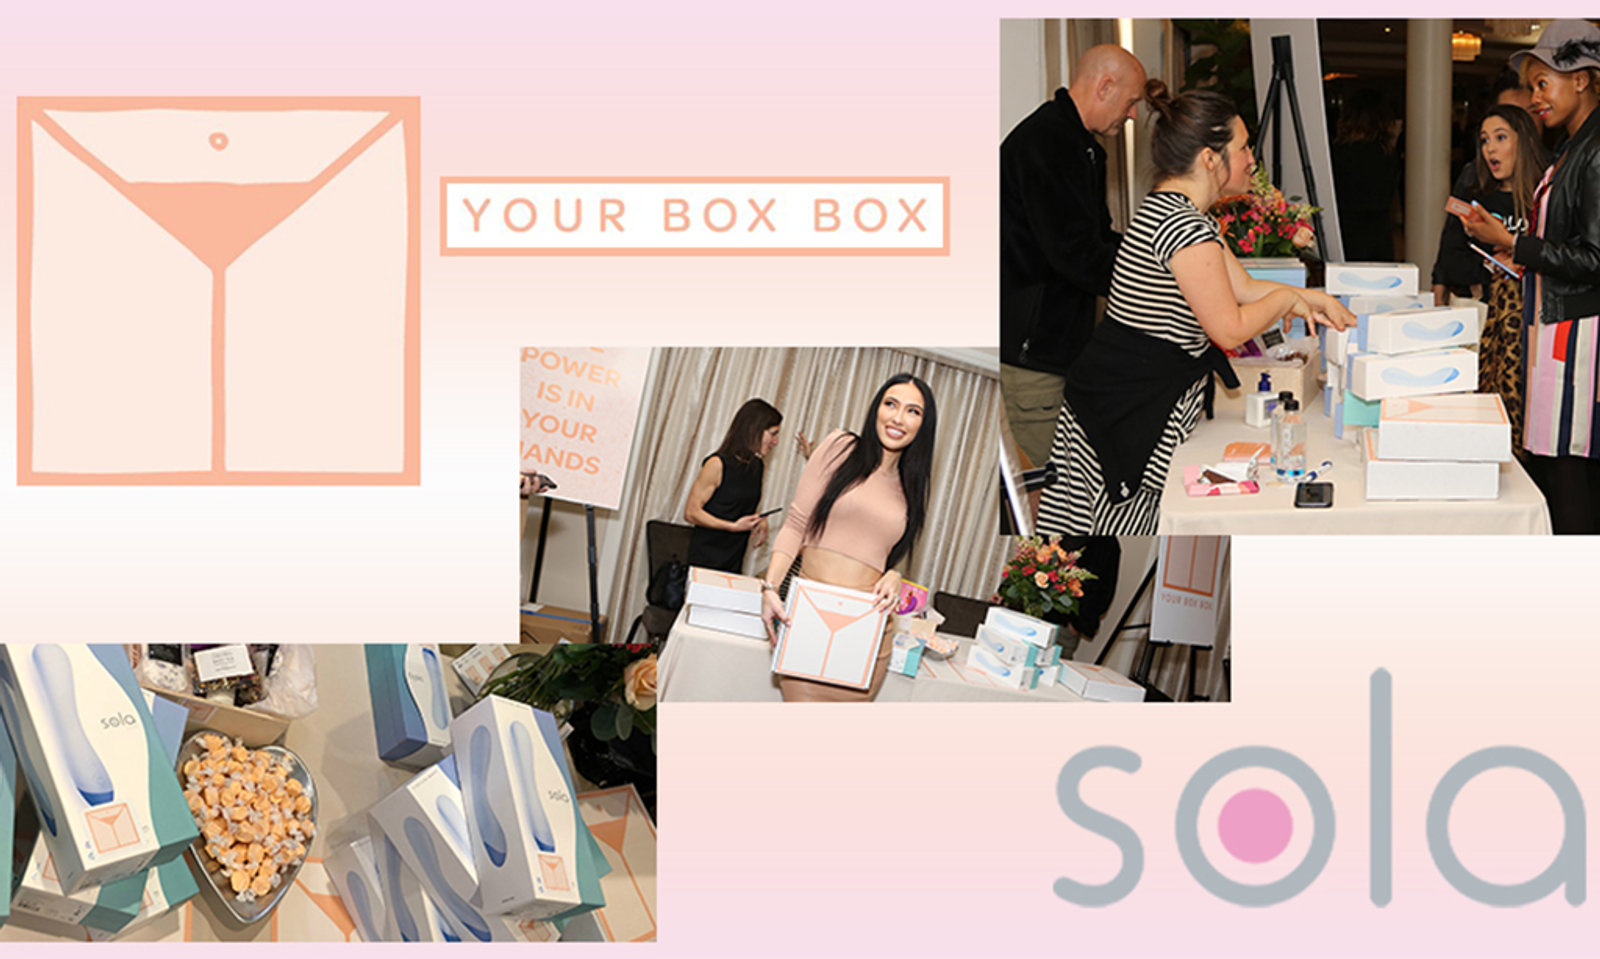 Your Box Box & Sola Provided Goodies for Oscars Charity Event